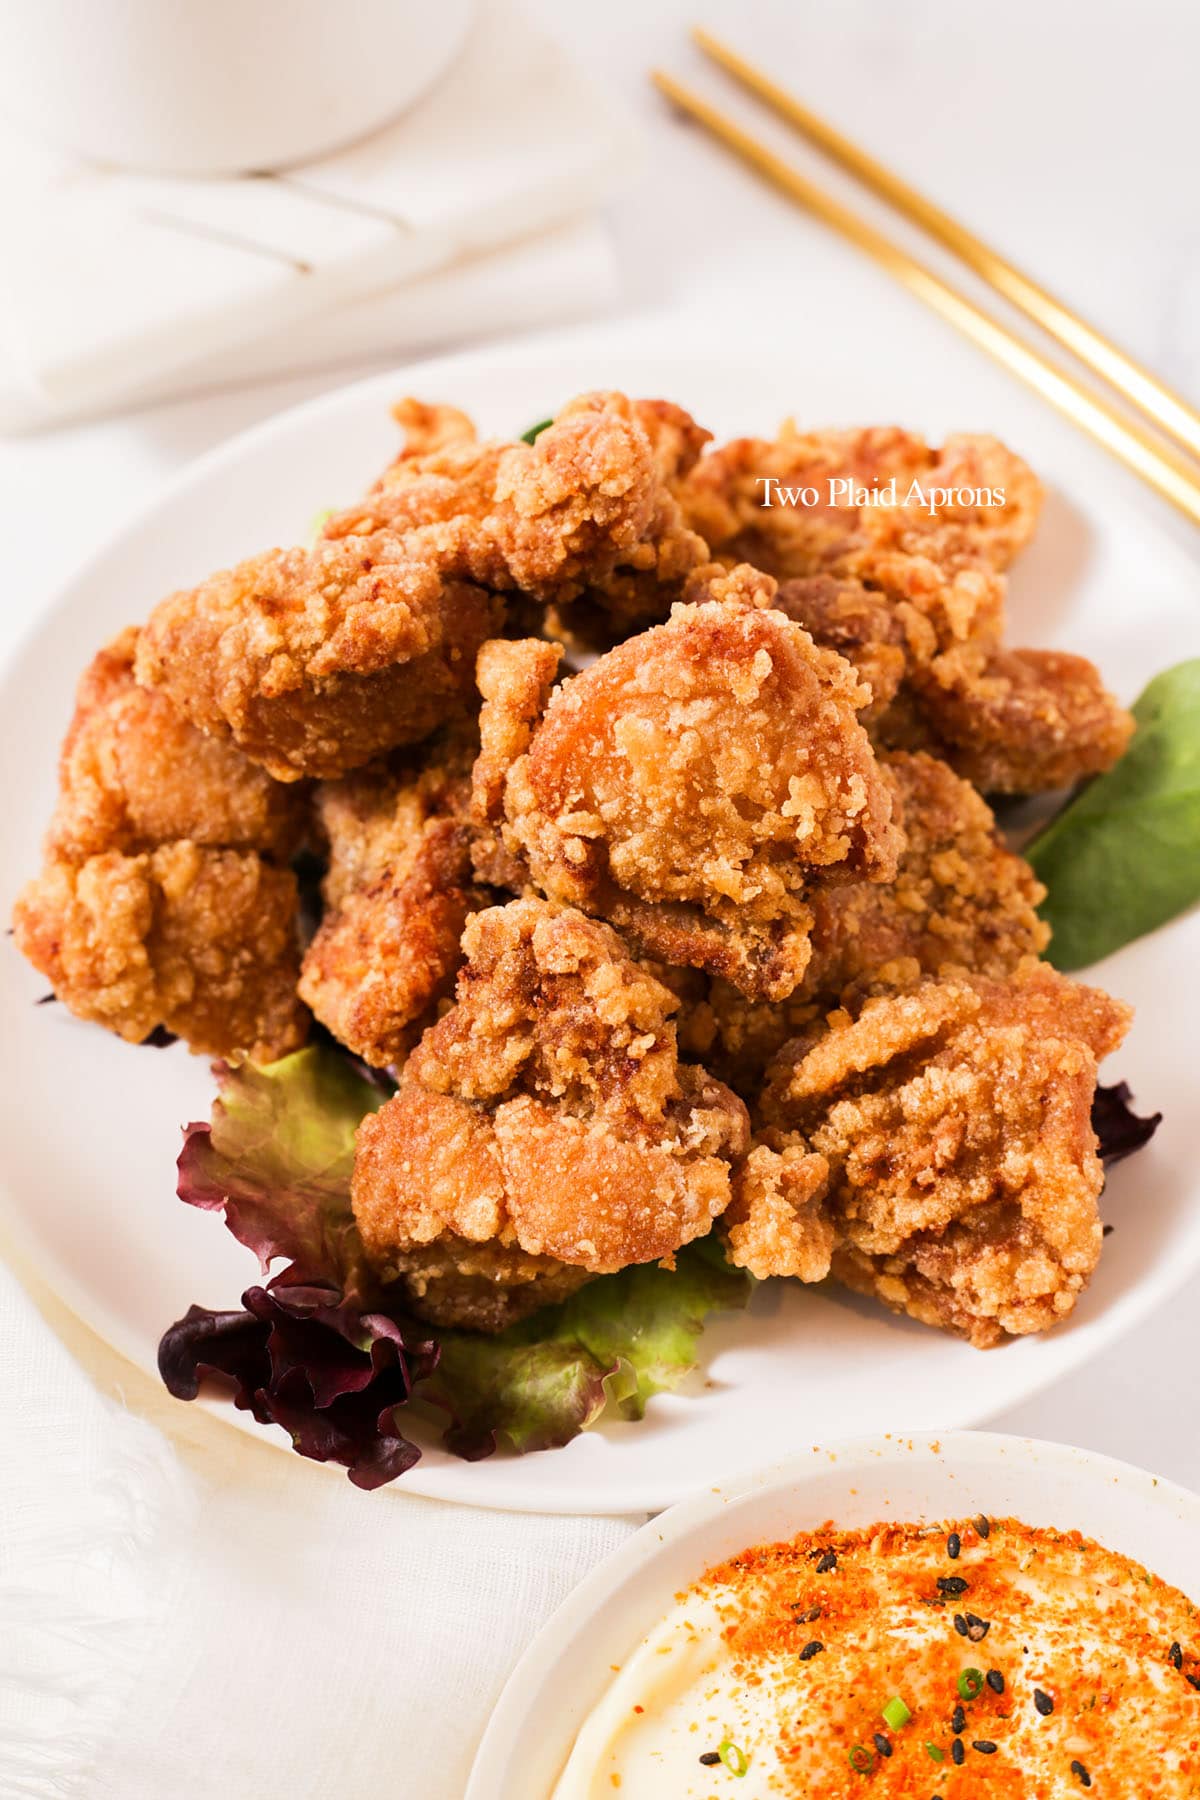 Karaage chicken on plate with dipping sauce.